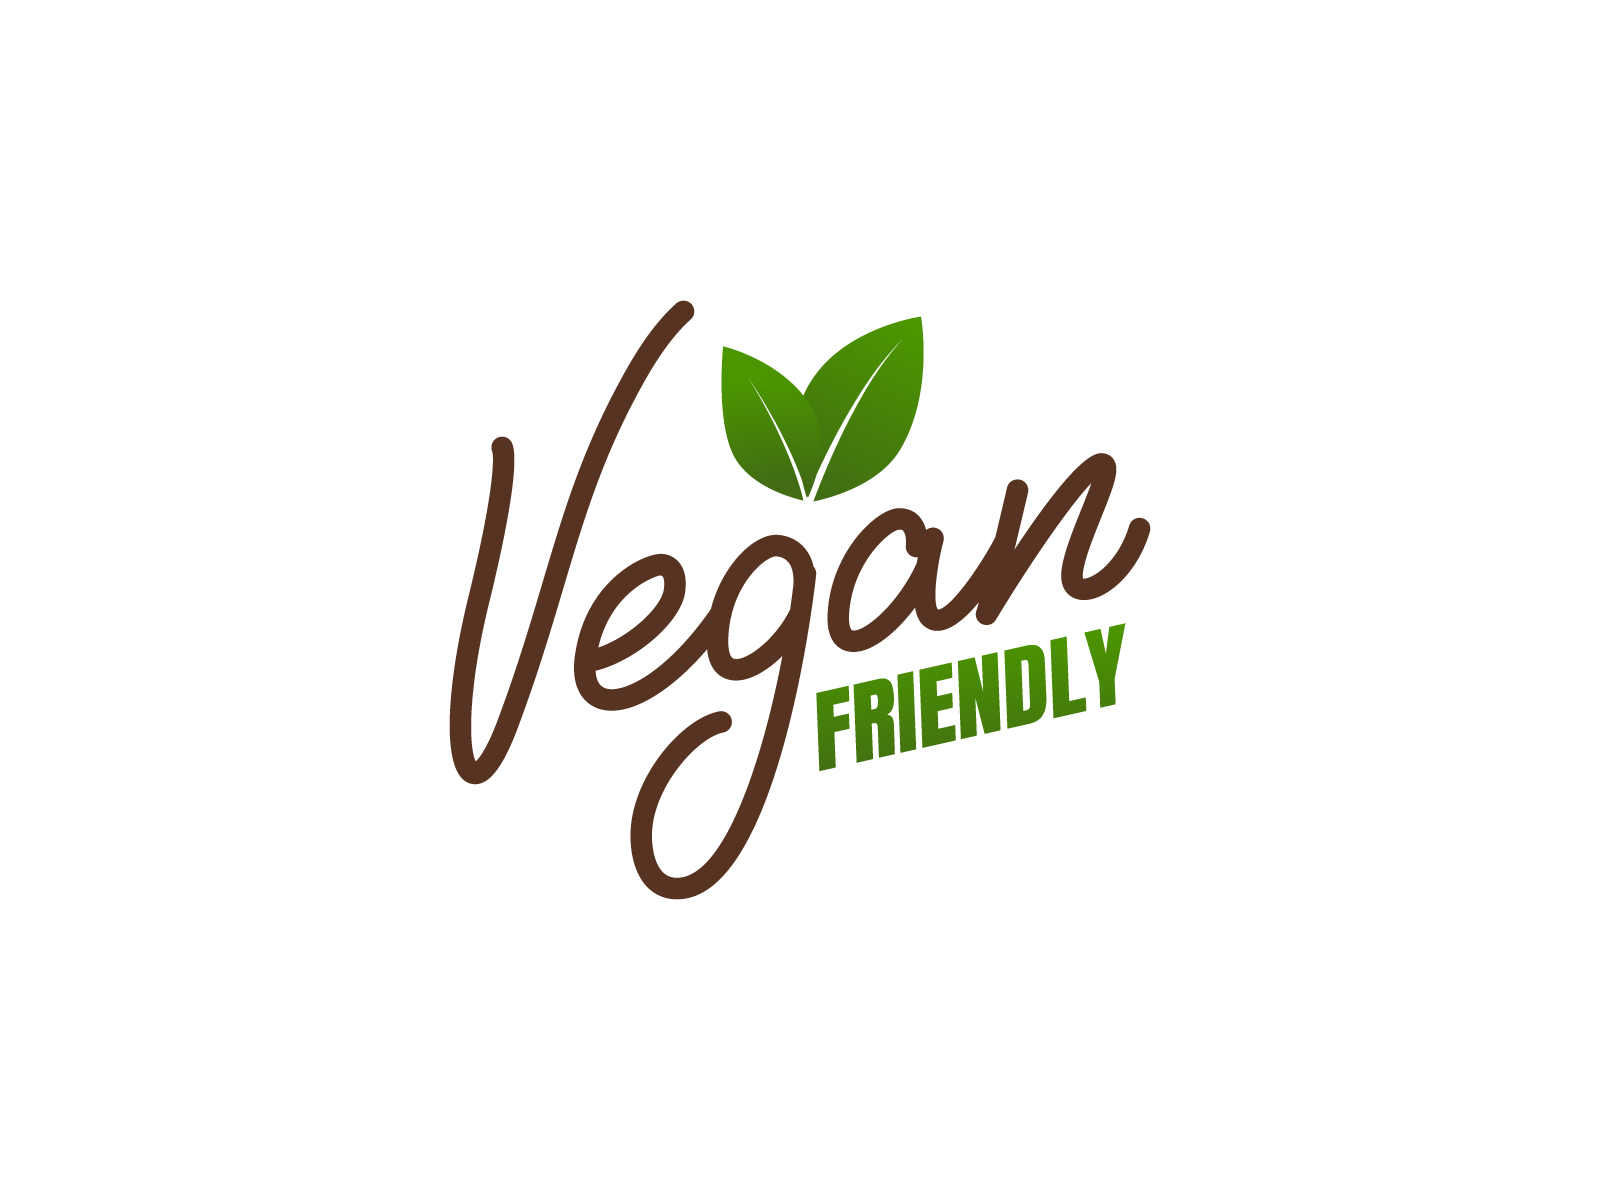 Vegan lettering labels design by Max Letters on Dribbble